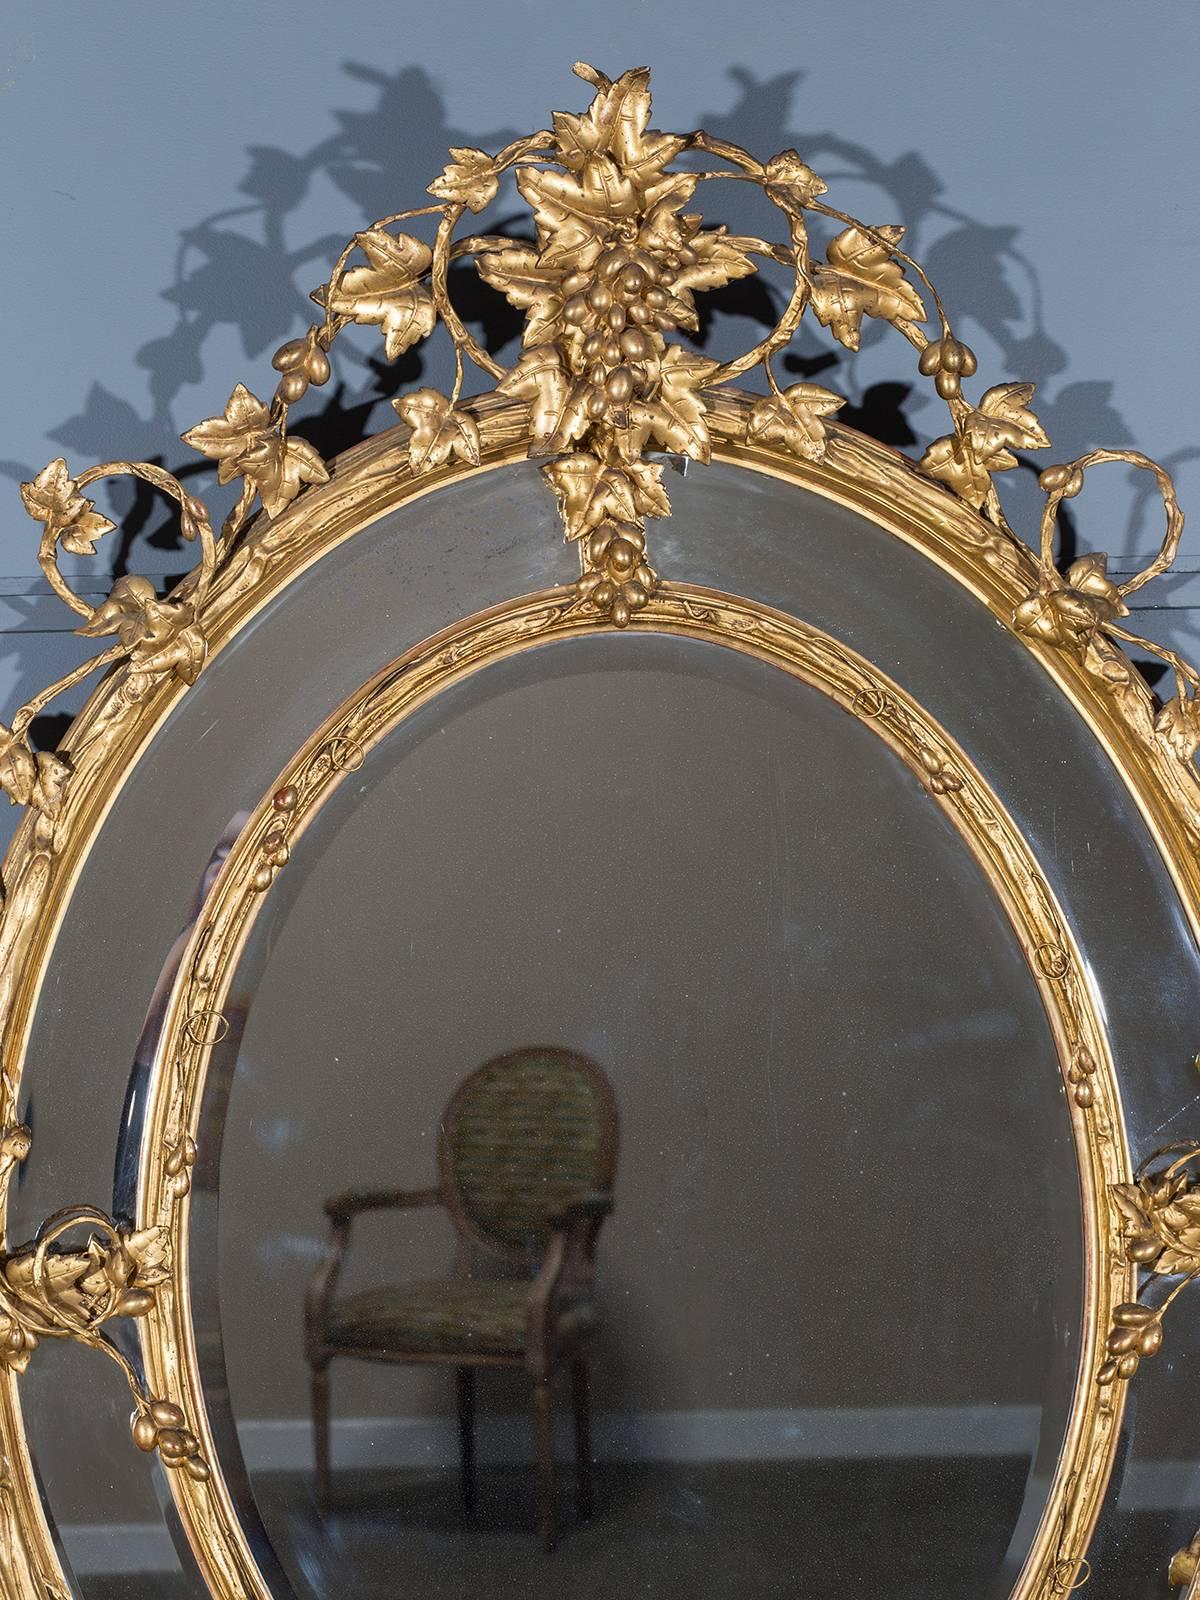 Receive our new selections direct from 1stdibs by email each week. Please click Follow Dealer below and see them first!

The beautiful oval of this antique gold leaf French mirror circa 1875 is wreathed with a trailing vine of grape leaves and